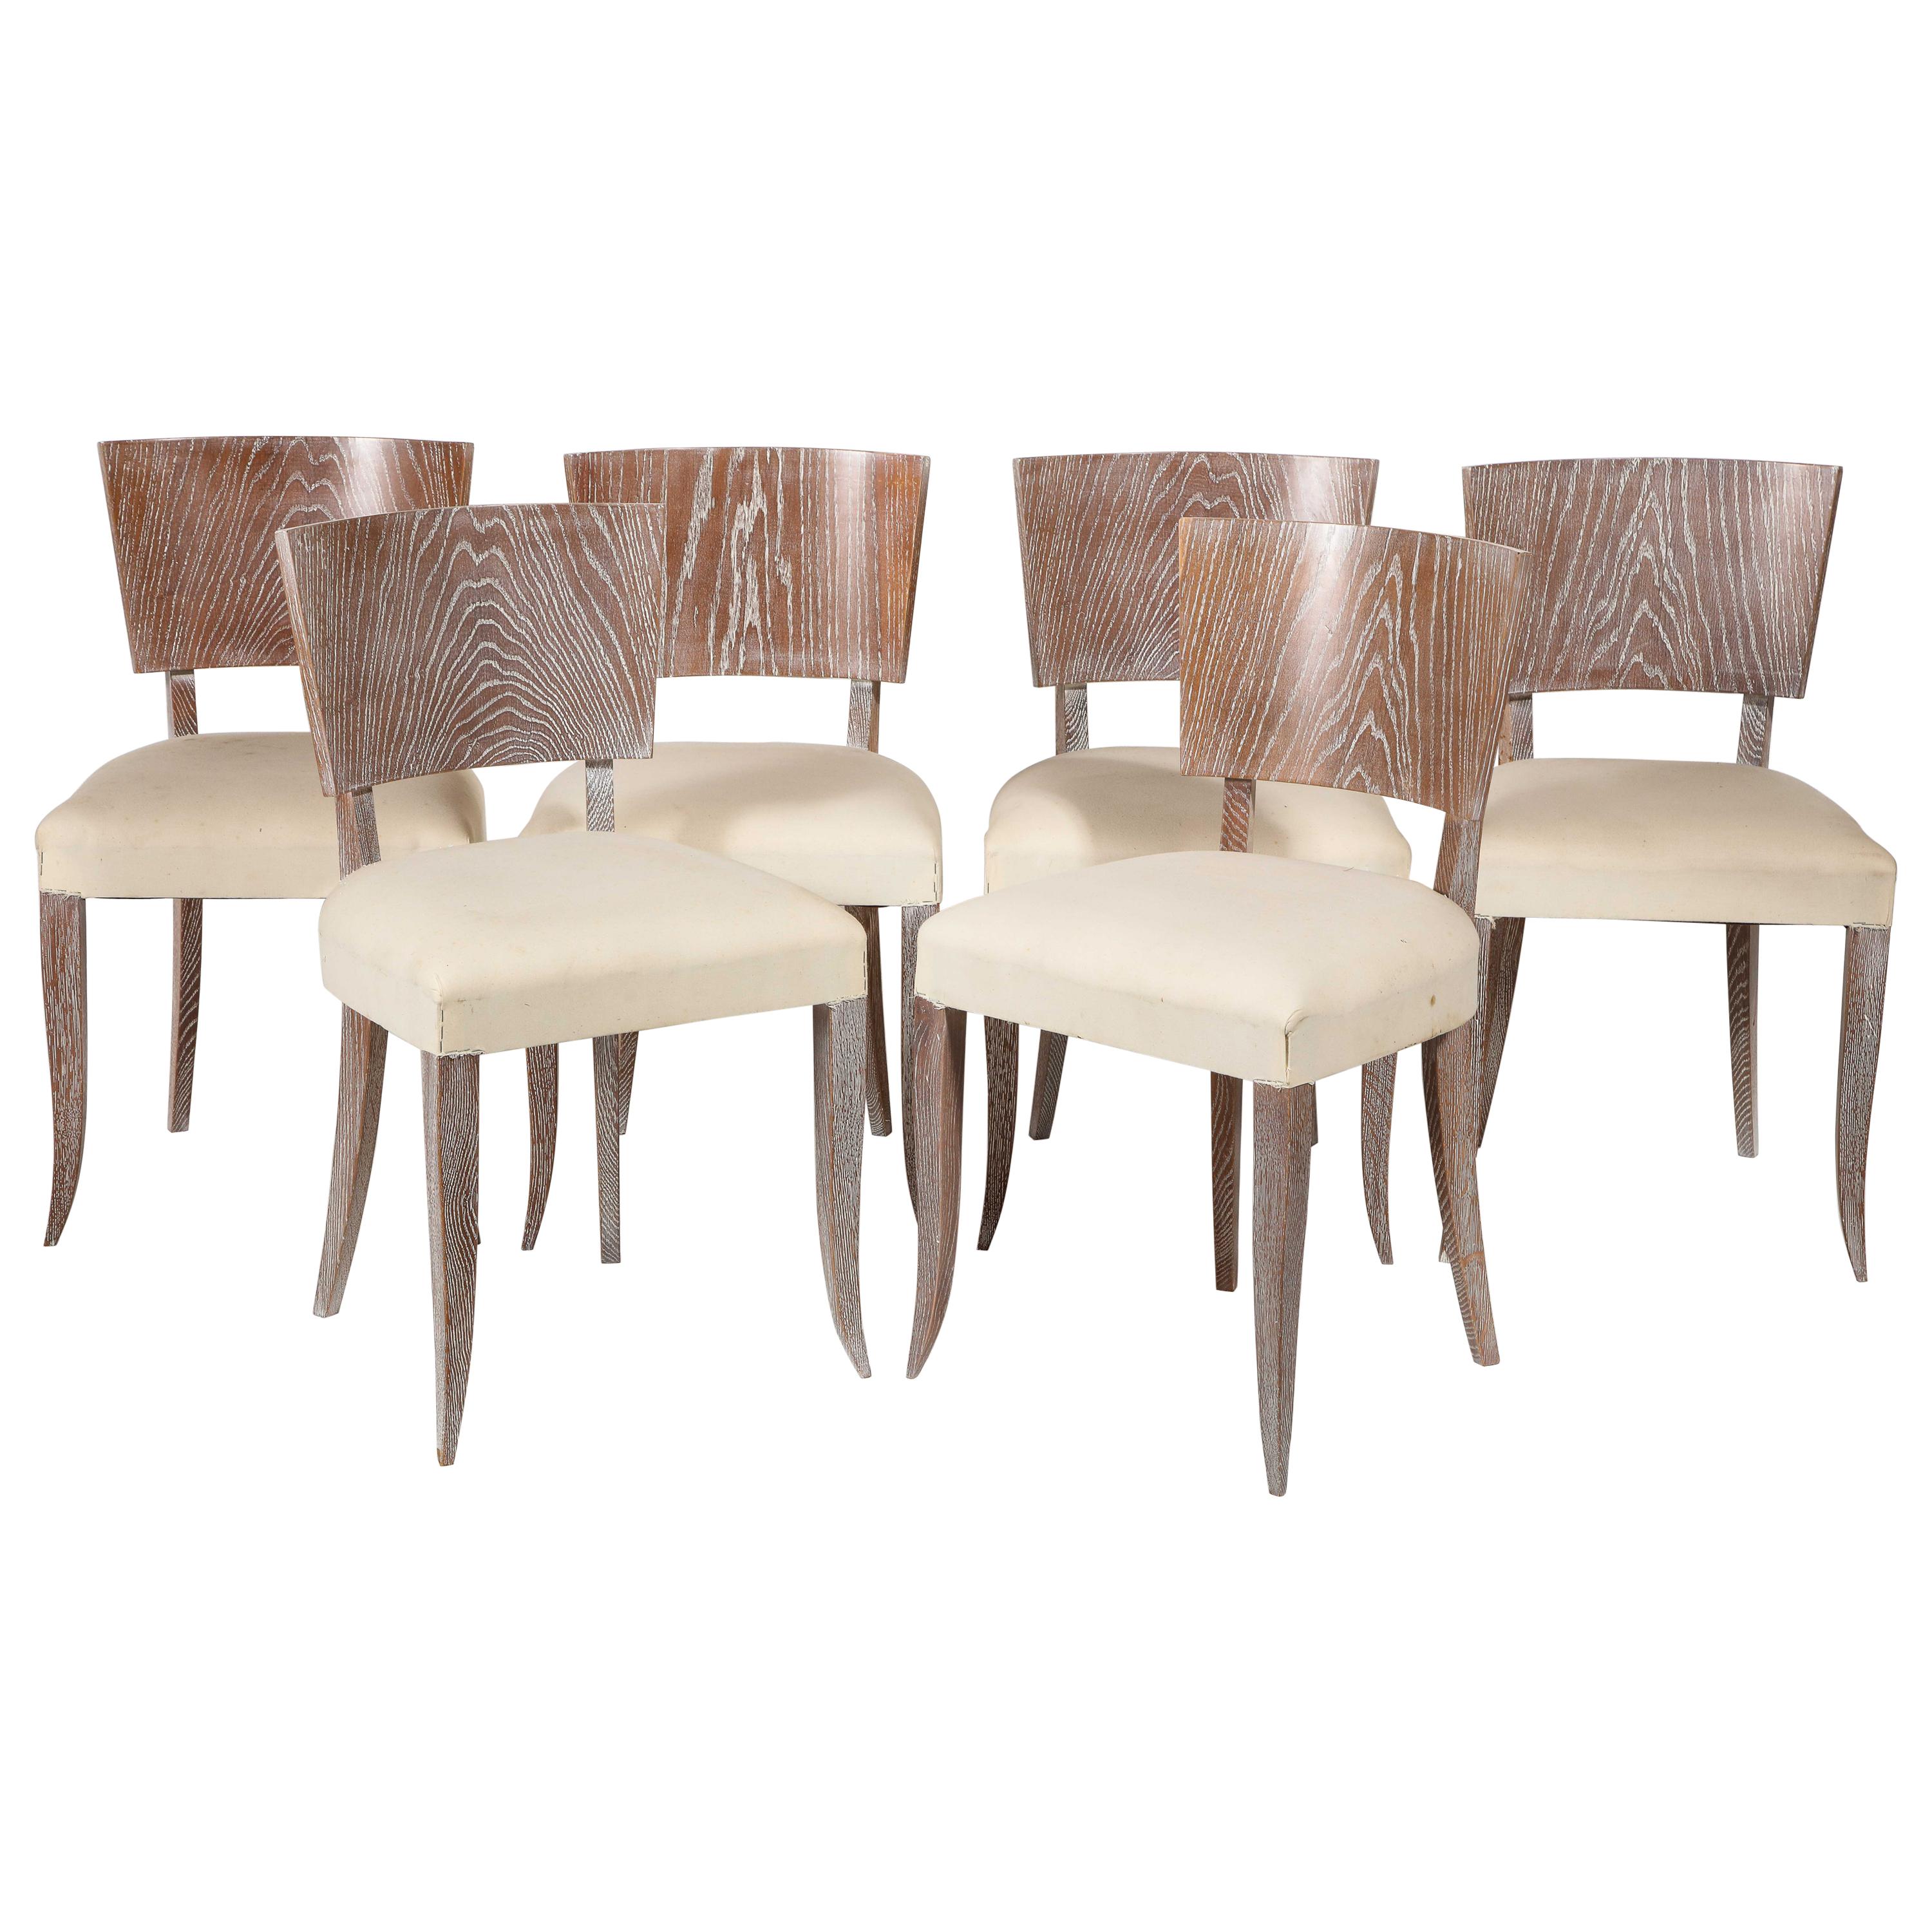 6 French midcentury cerused dining chairs, 1930s

Beautiful oak Art Deco French dining chairs, in lovely condition. The wood is beautifully cerused. The seats could do with being upholstered.
Jean Michel Frank inspired.